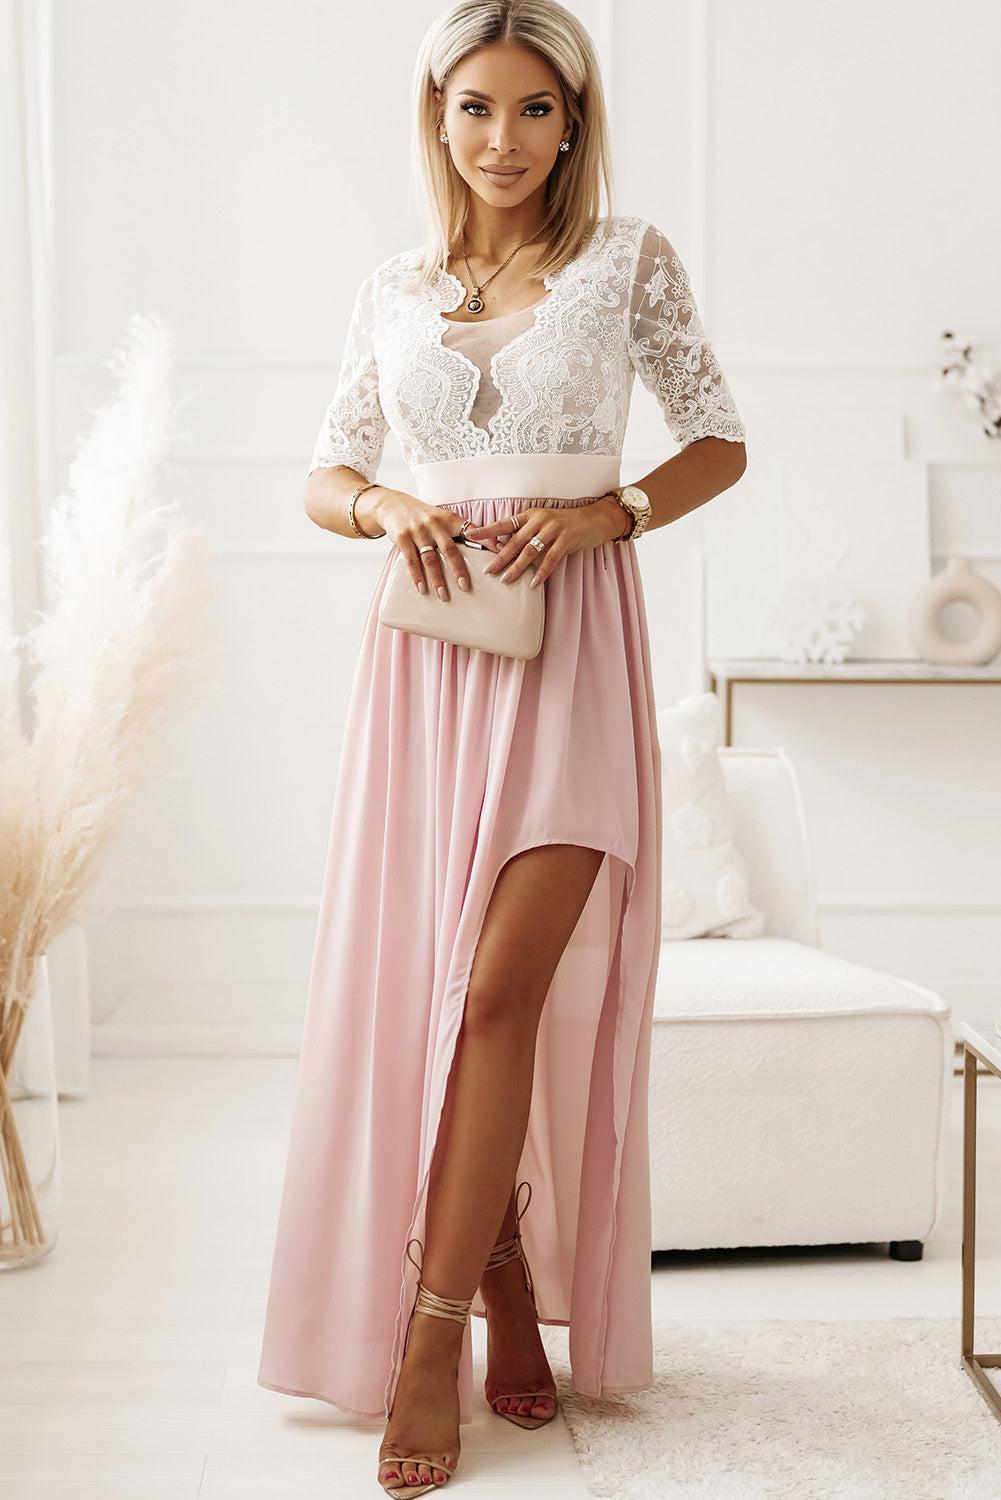 a woman in a long pink skirt and lace top